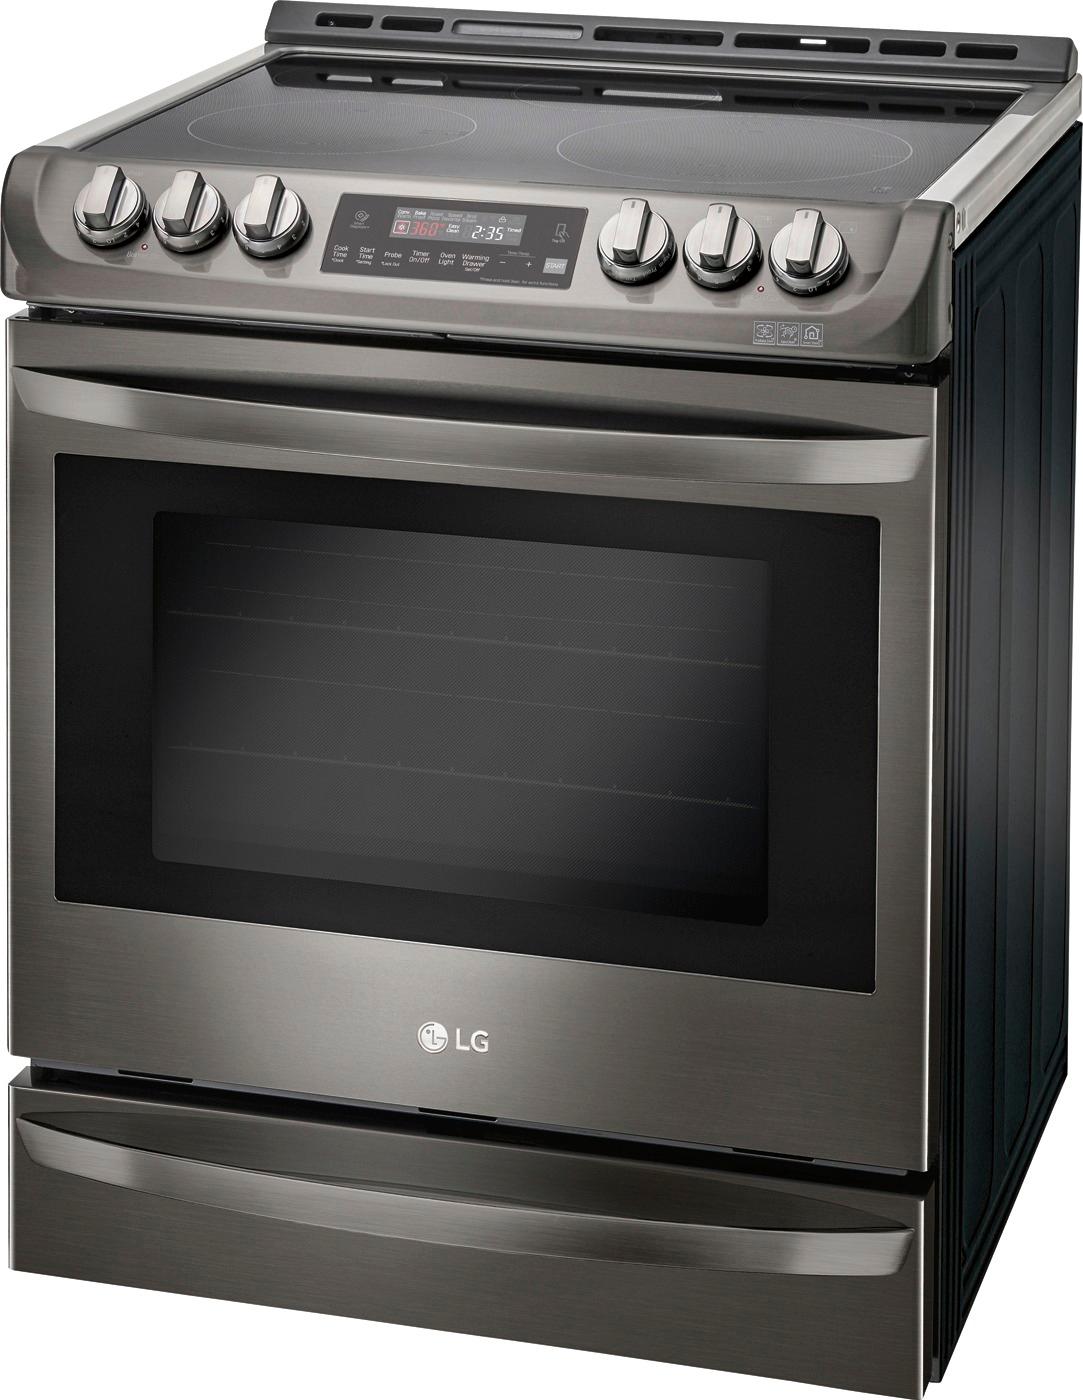 Left View: LG - 6.3 Cu. Ft. Self-Cleaning Slide-In Electric Range with ProBake Convection - Black stainless steel